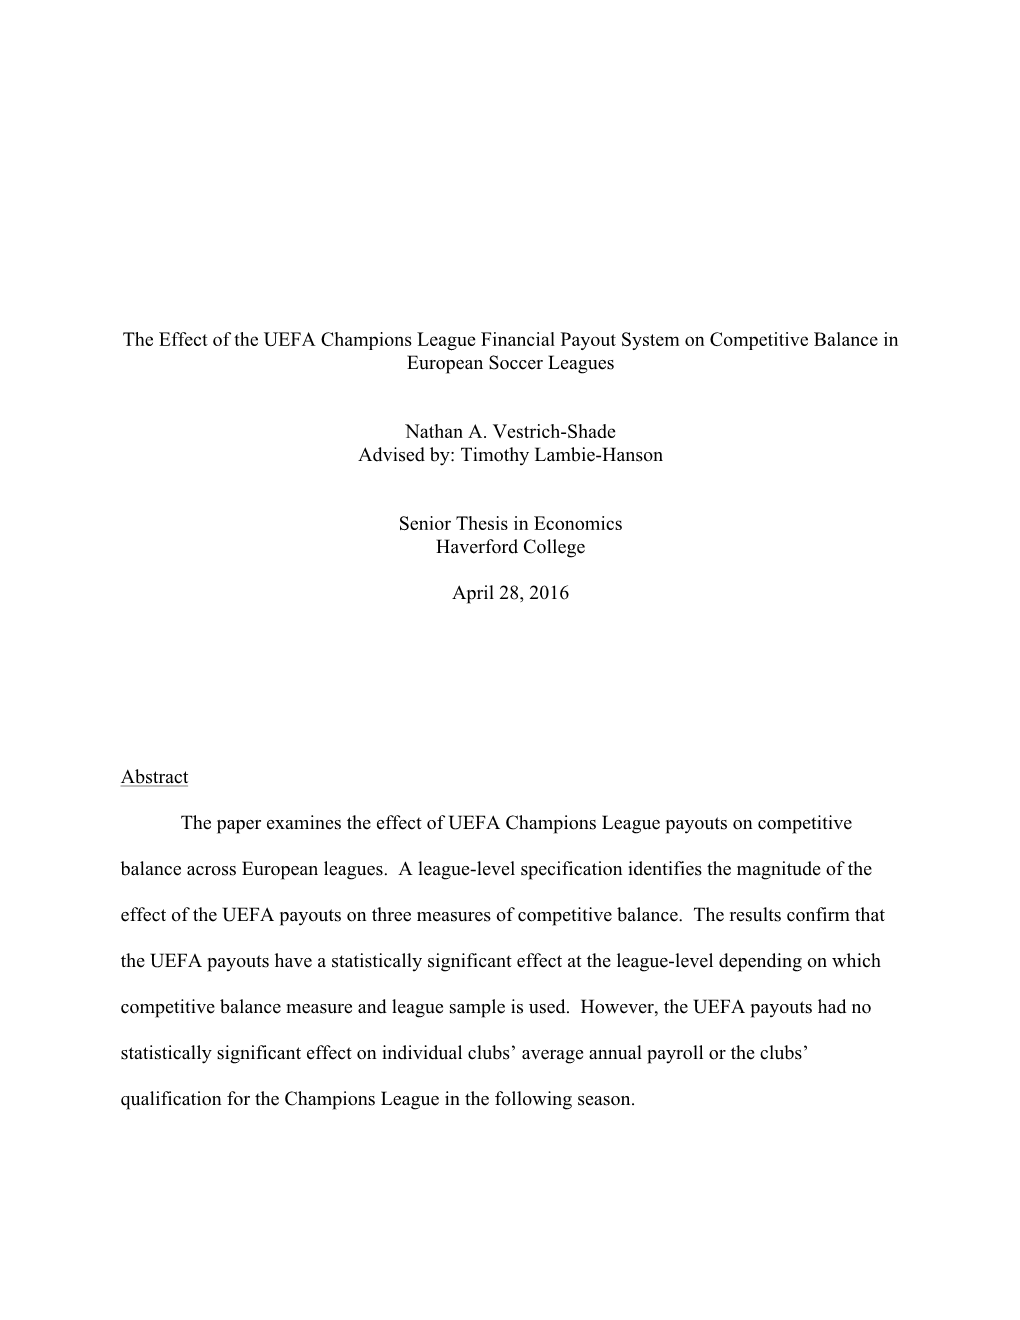 The Effect of the UEFA Champions League Financial Payout System on Competitive Balance in European Soccer Leagues